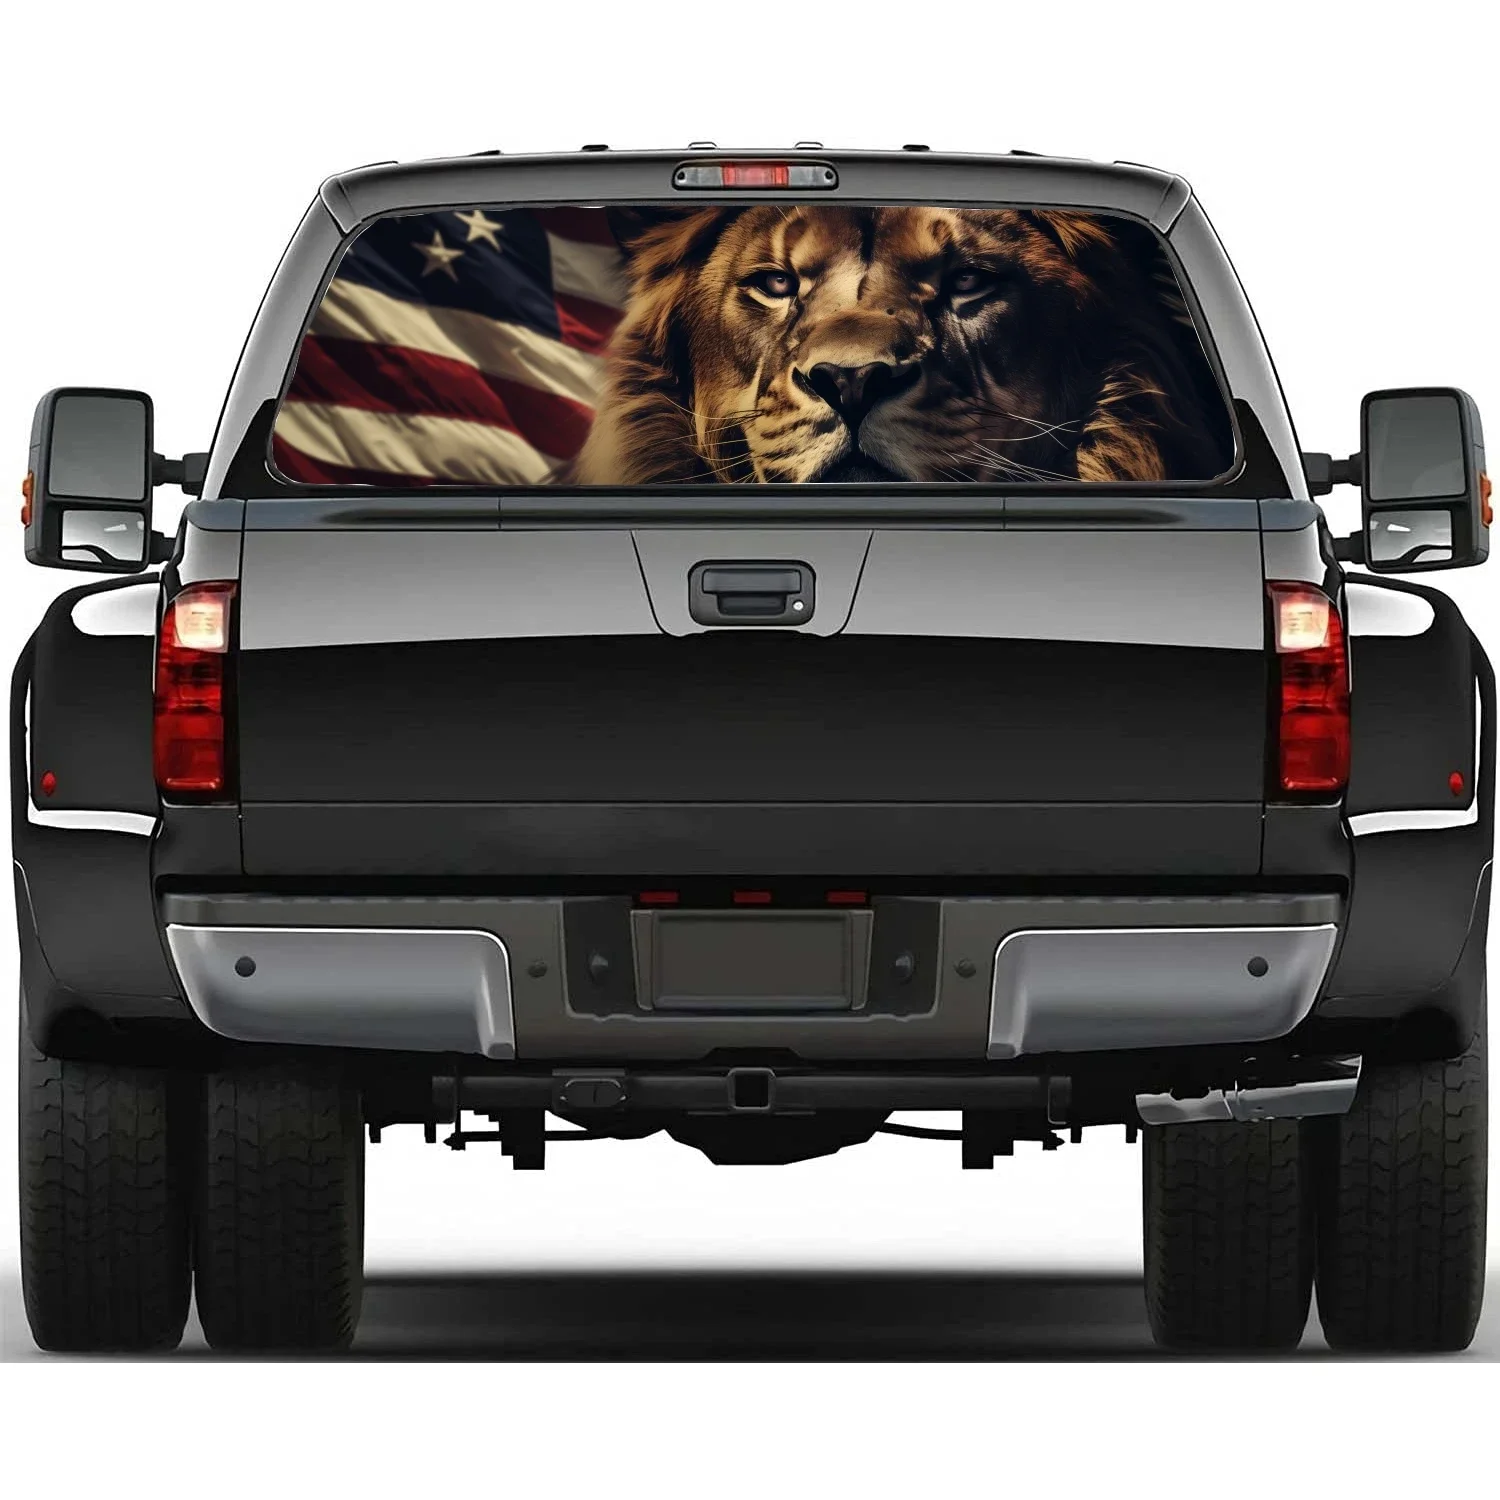 

Lion with American Flag Rear Window Decal Fit Pickup,Truck,Car Universal See Through Perforated Back Windows Vinyl Sticker